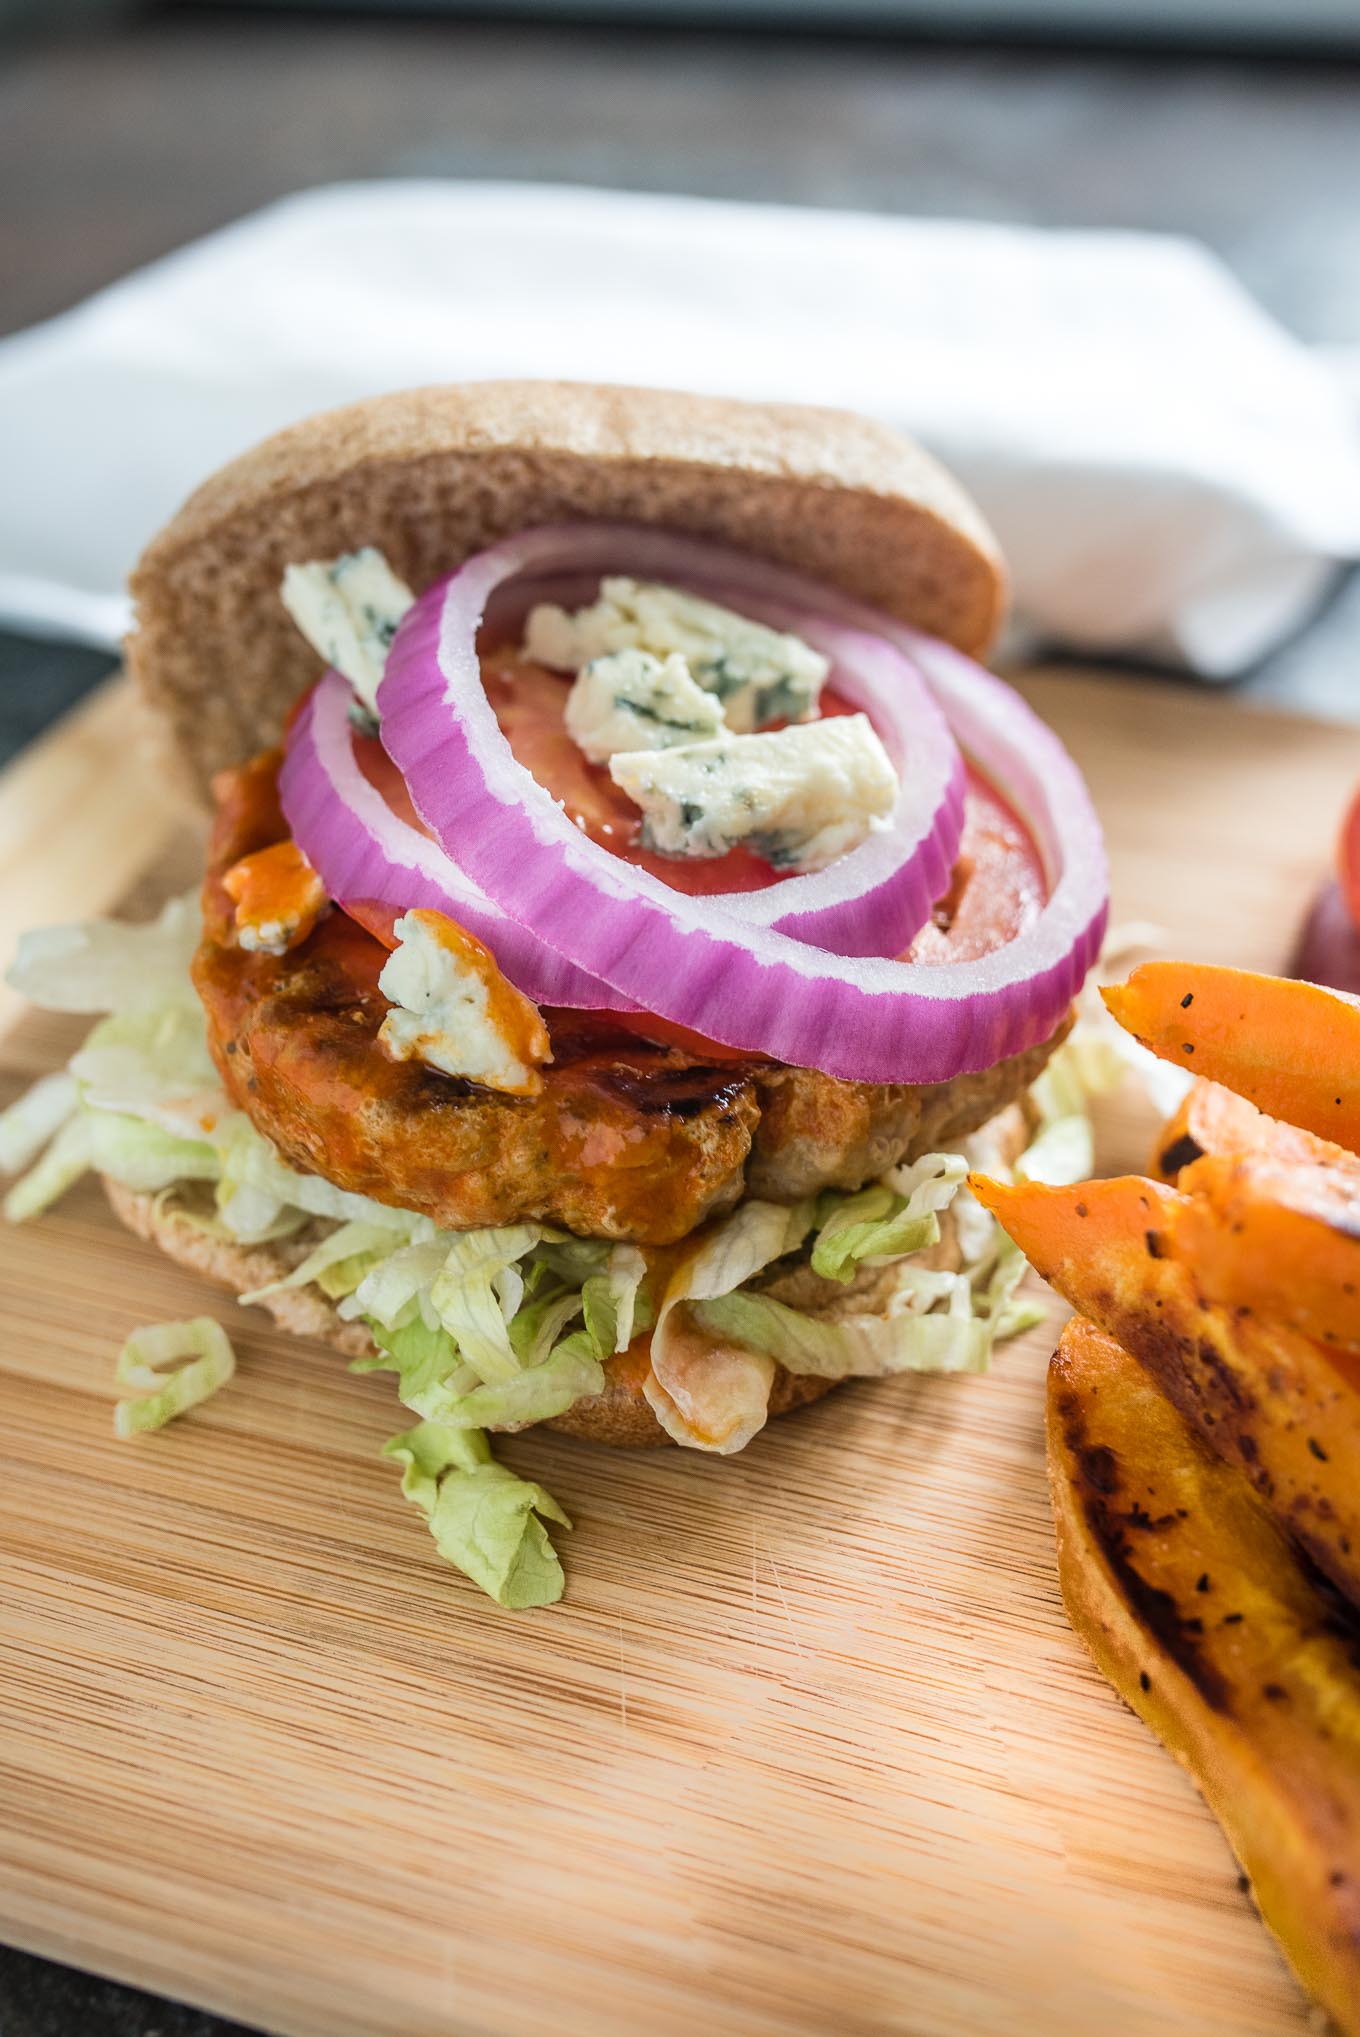  Skip the fried wings and make some easy and tasty Buffalo Turkey Burgers. For a low carb version serve them in lettuce wraps instead of on a bun!